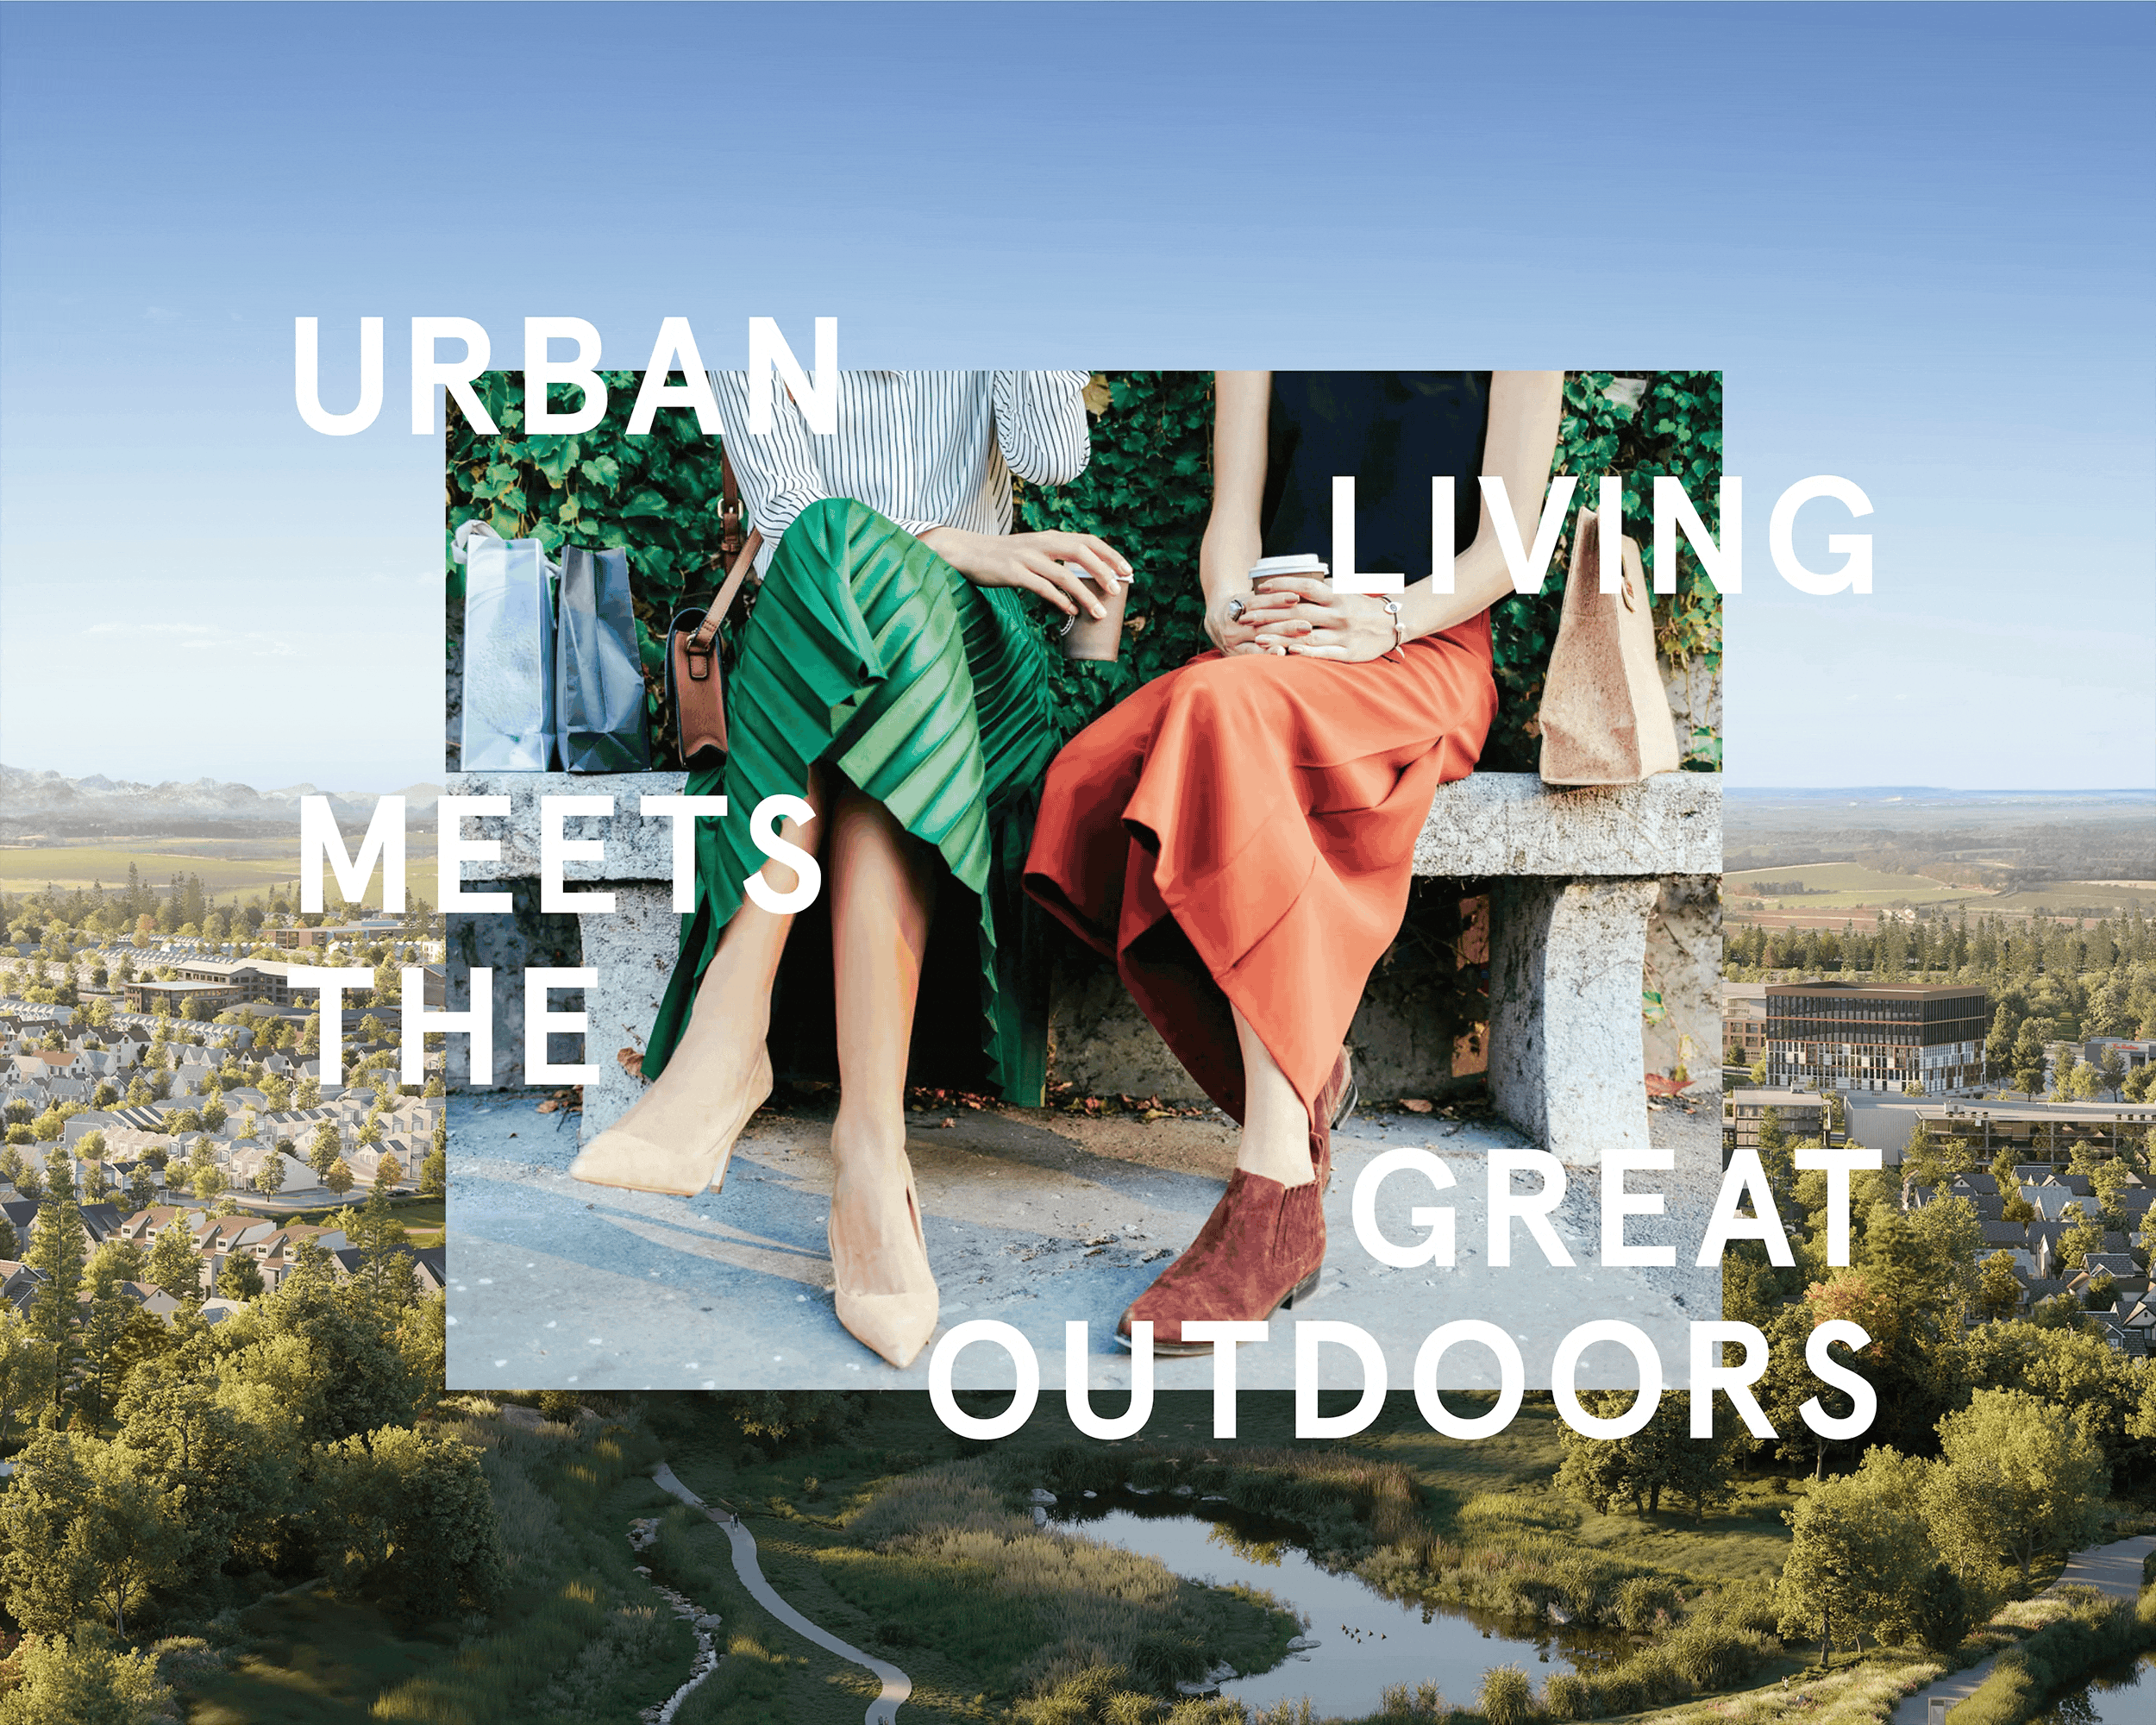 Two women sitting today on a park bench. Text overlaid on the image urban living meets the great outdoors.  